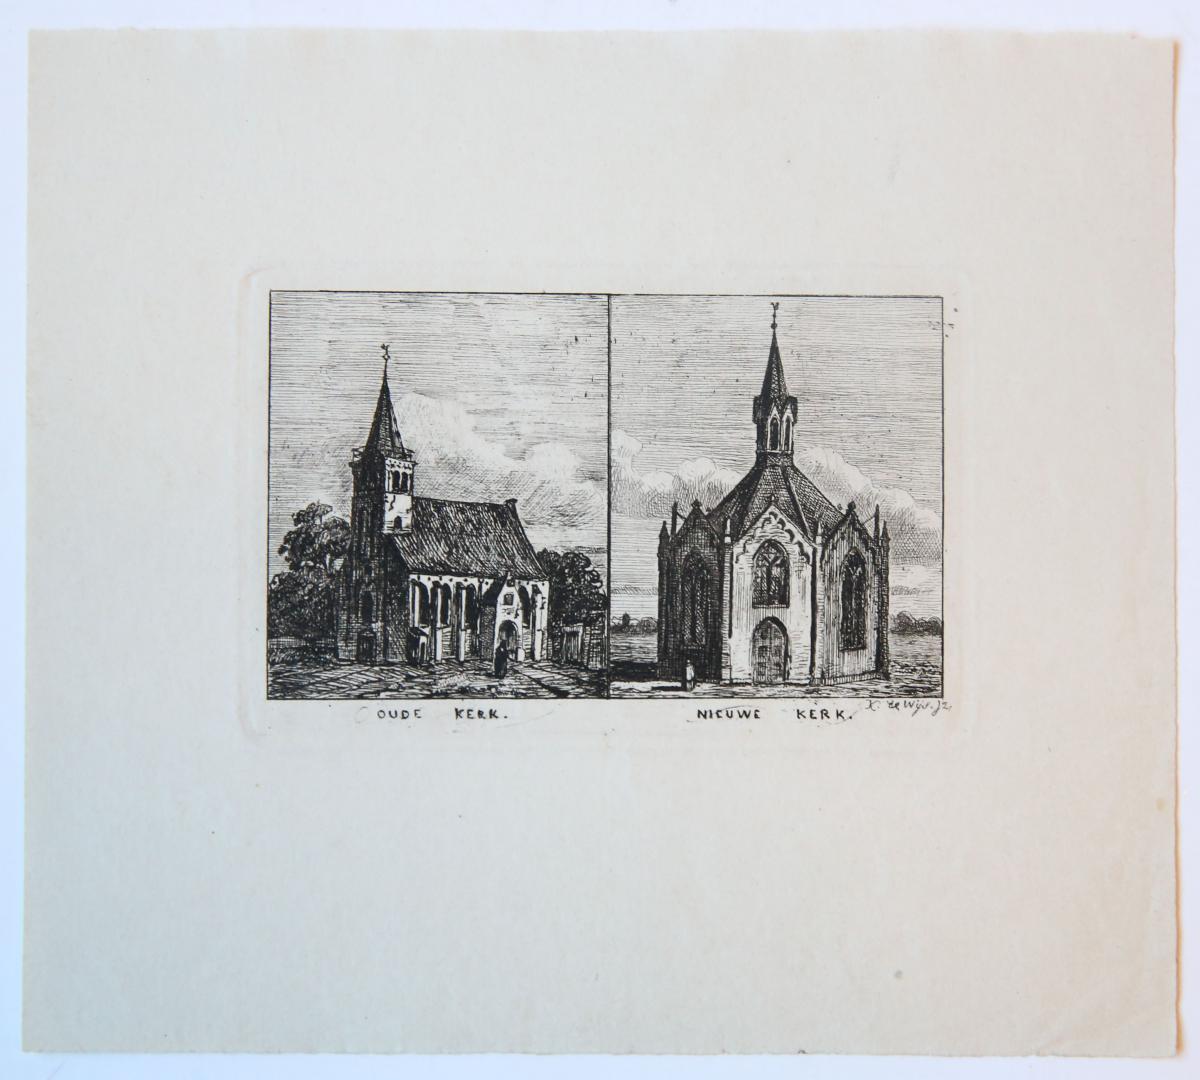 [Antique print, etching] Two churches (Oude en Nieuwe kerk In Den Haag?), published ca. 1854.